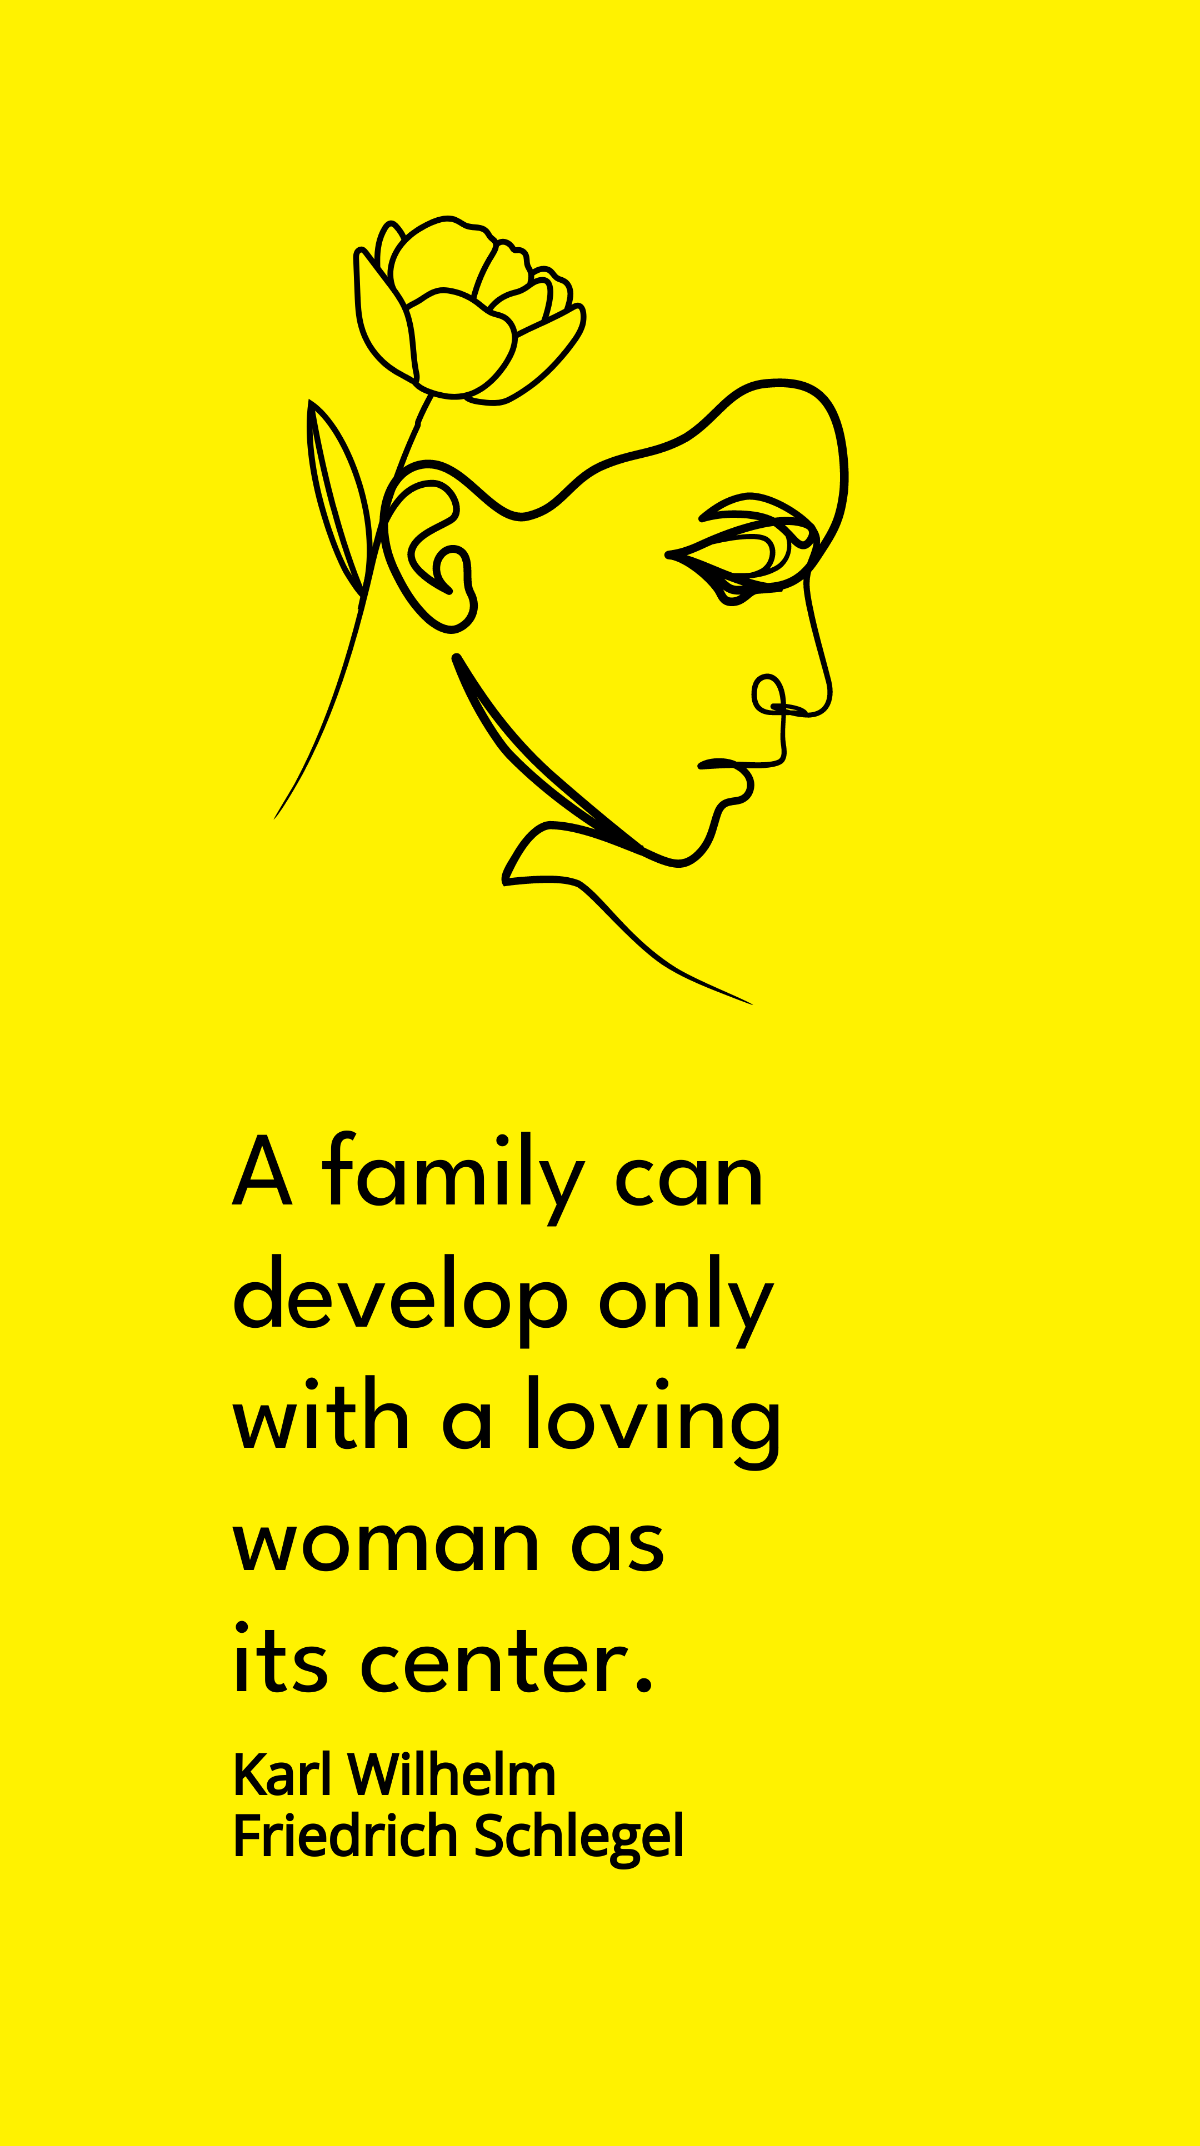 Karl Wilhelm Friedrich Schlegel - A family can develop only with a loving woman as its center.